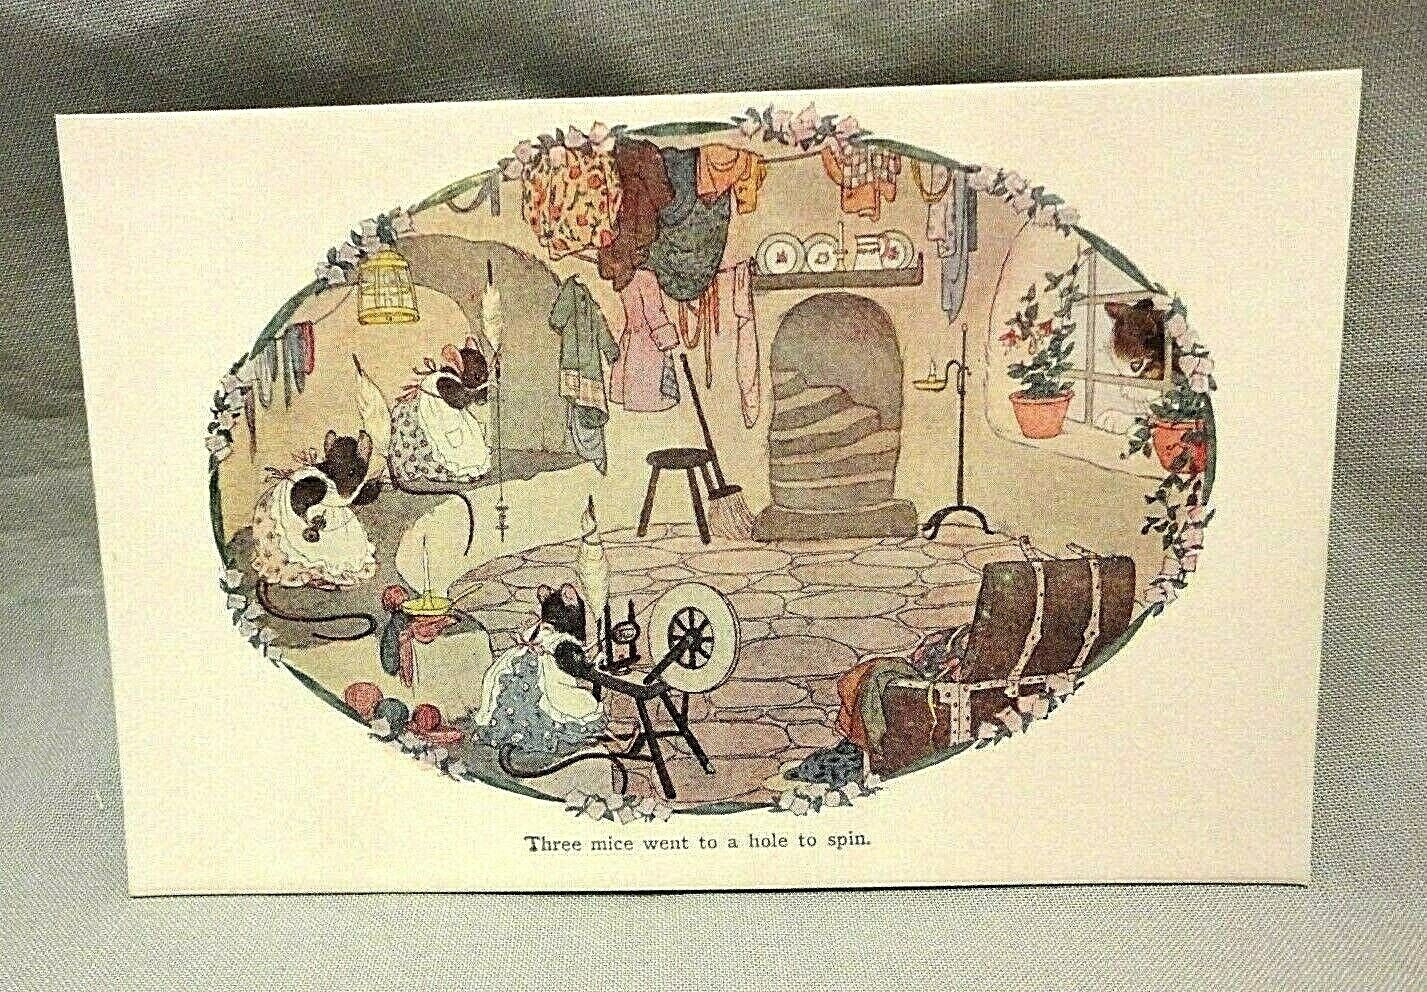 H Willebeek Le Mair Augener Postcard Small Rhymes 3 Mice Went to a Hole to Spin